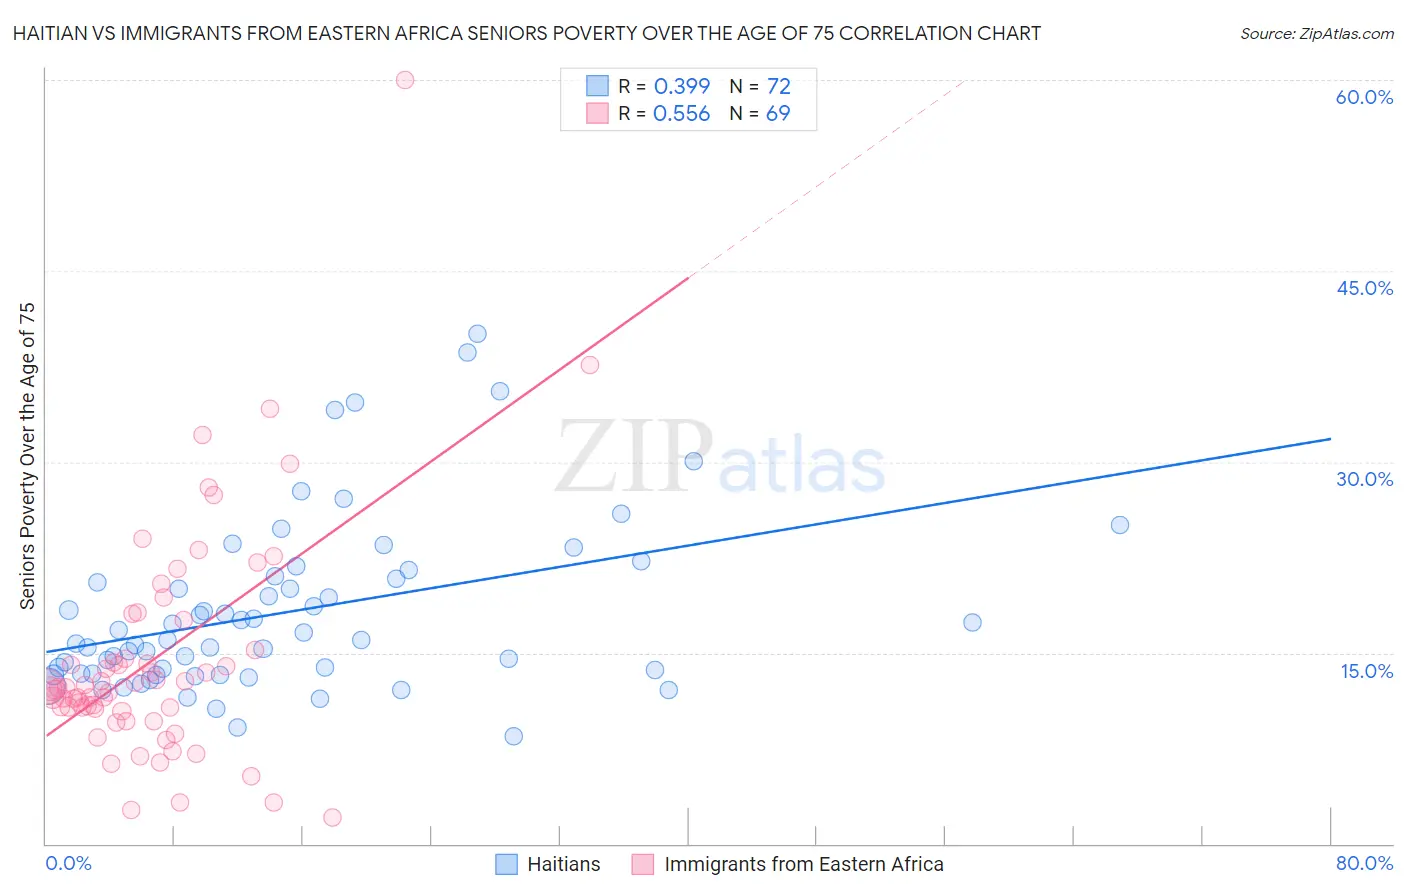 Haitian vs Immigrants from Eastern Africa Seniors Poverty Over the Age of 75